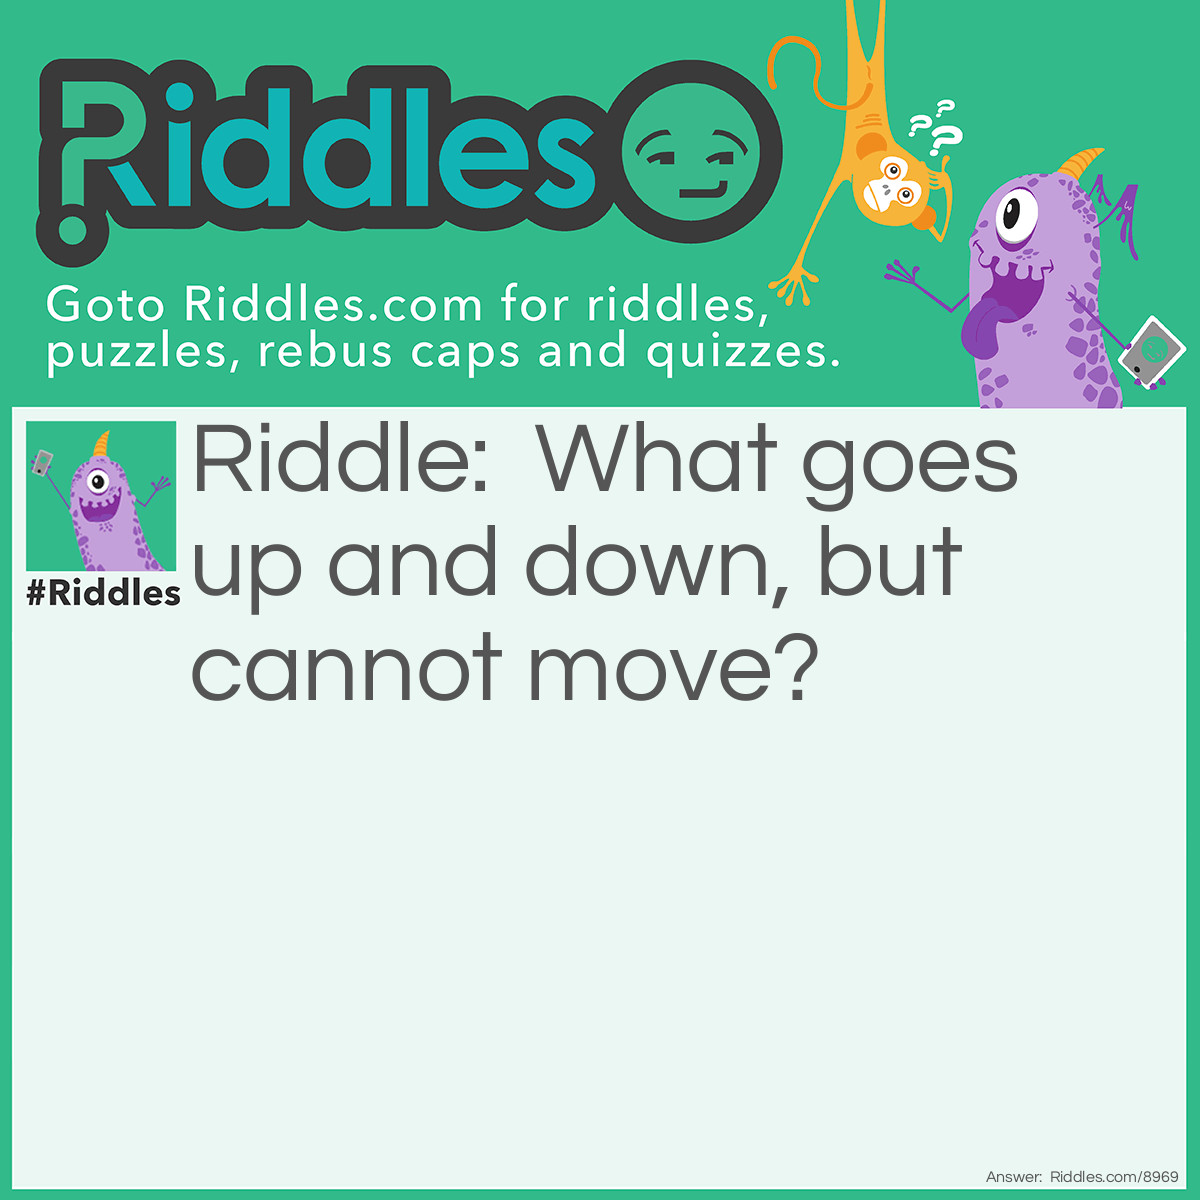 Riddle: What goes up and down, but cannot move? Answer: A staircase.